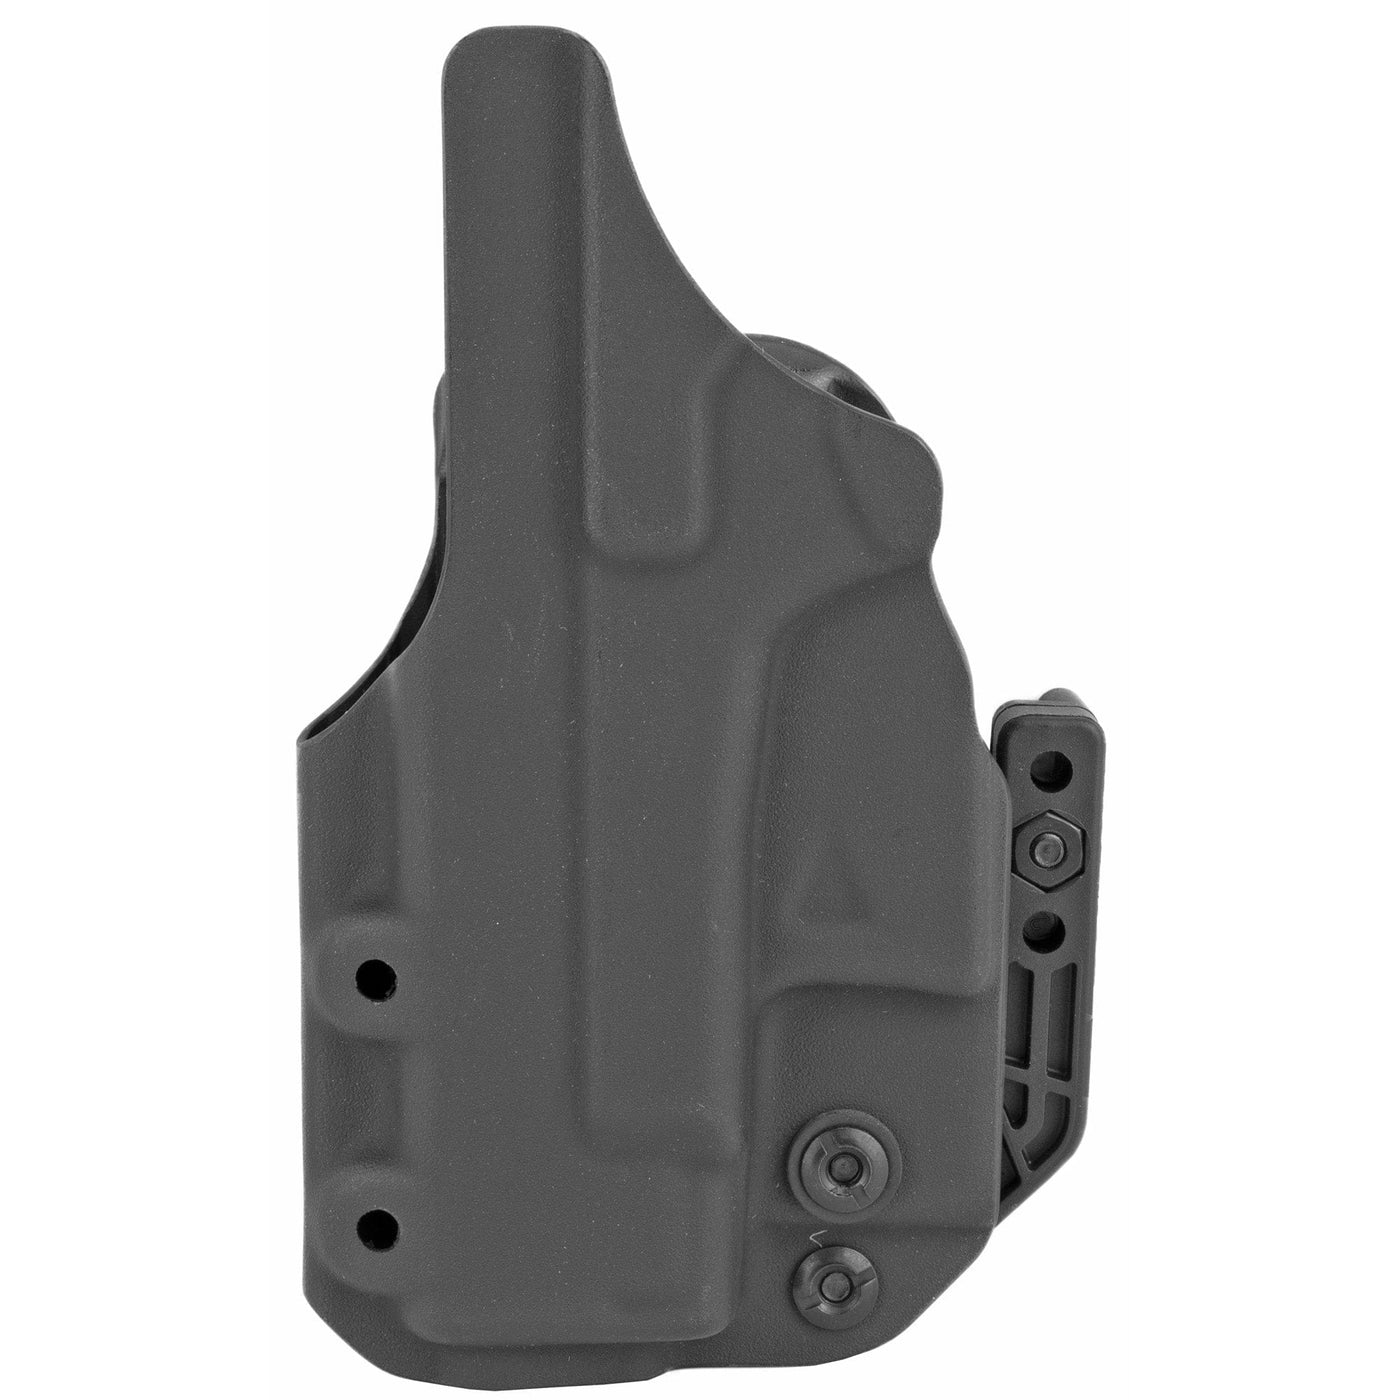 L.A.G. Tactical, Inc. Lag Apd Mk Ii For Glock 26 Blk Rh Holsters